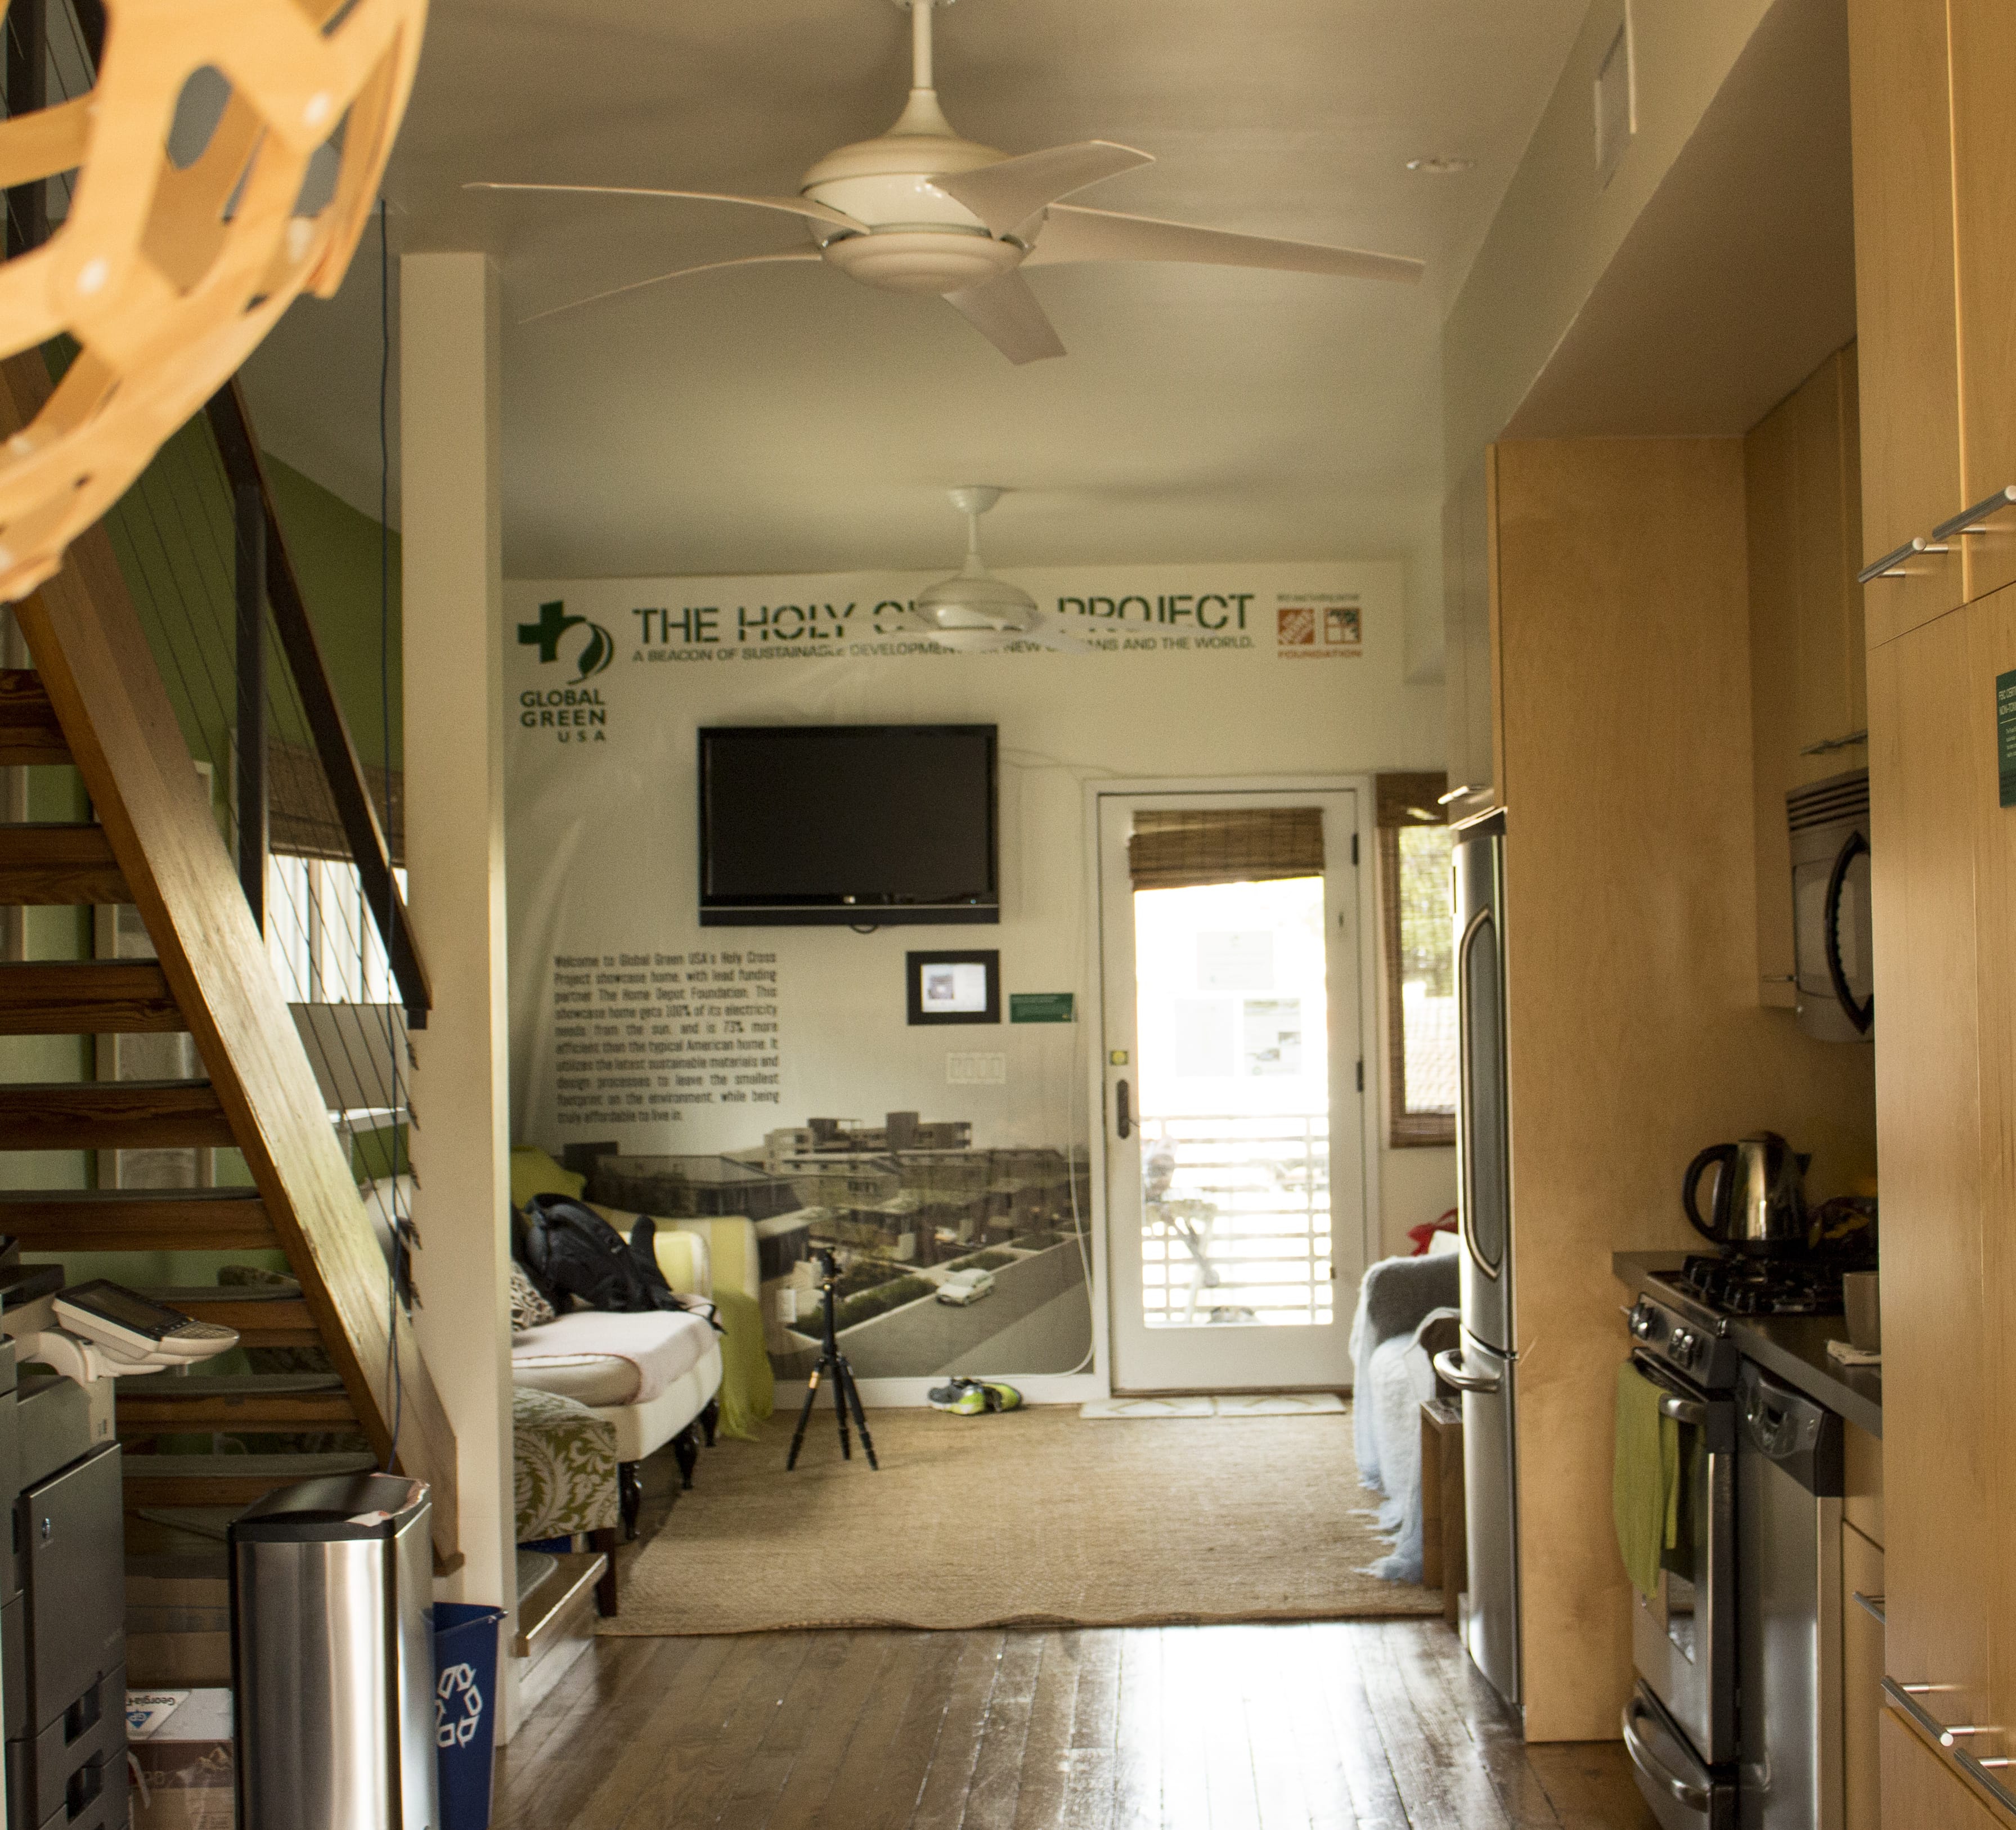 The Global Green single family homes in the Lower Ninth Ward are considered net zero, meaning they produce as much or more energy than they expend. The homes interiors are built with readily renewable and environmentally friendly materials and decorated with art made by local artists.